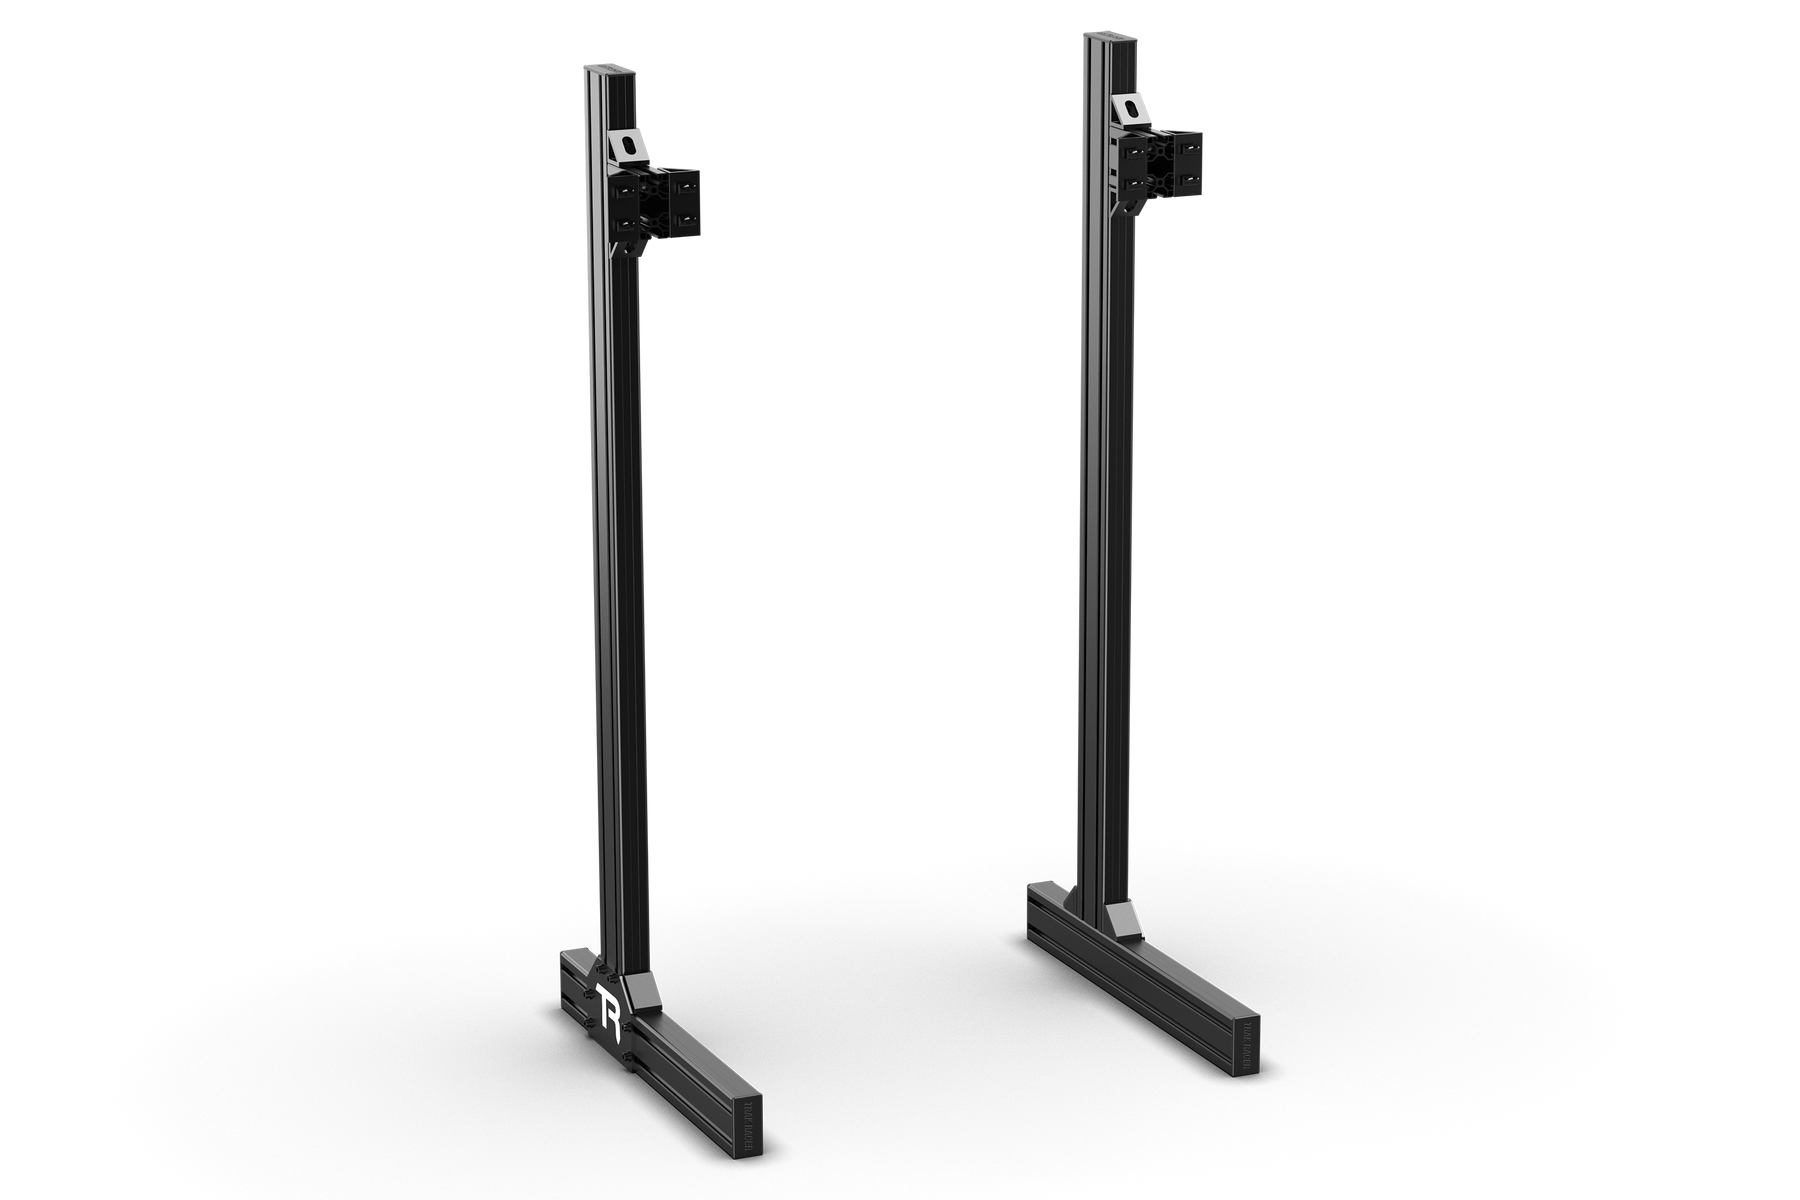 Legs for Floor monitor stand for TR8020 Monitor Stand - Black – Trak Racer